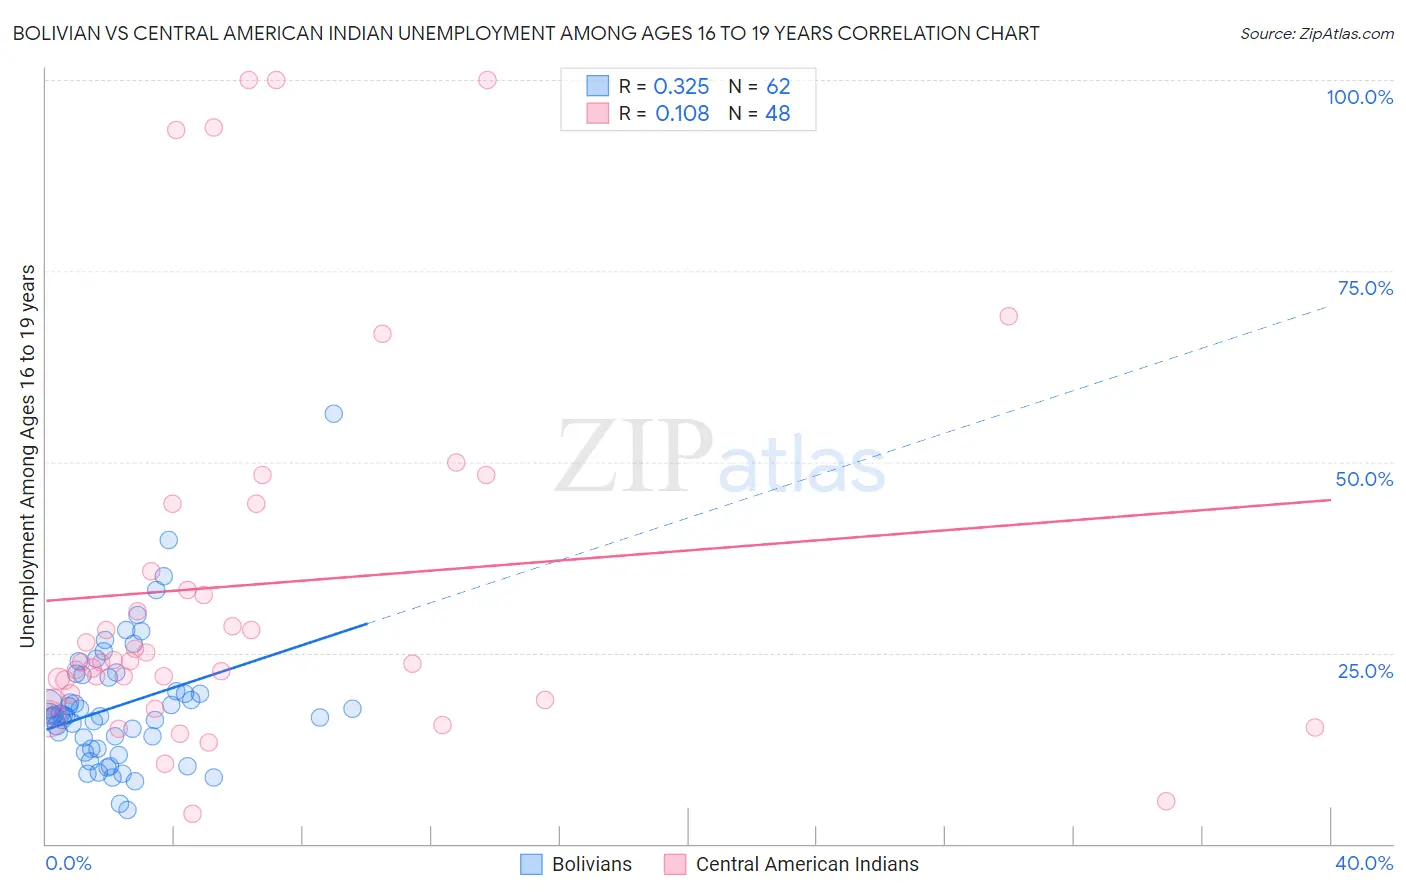 Bolivian vs Central American Indian Unemployment Among Ages 16 to 19 years